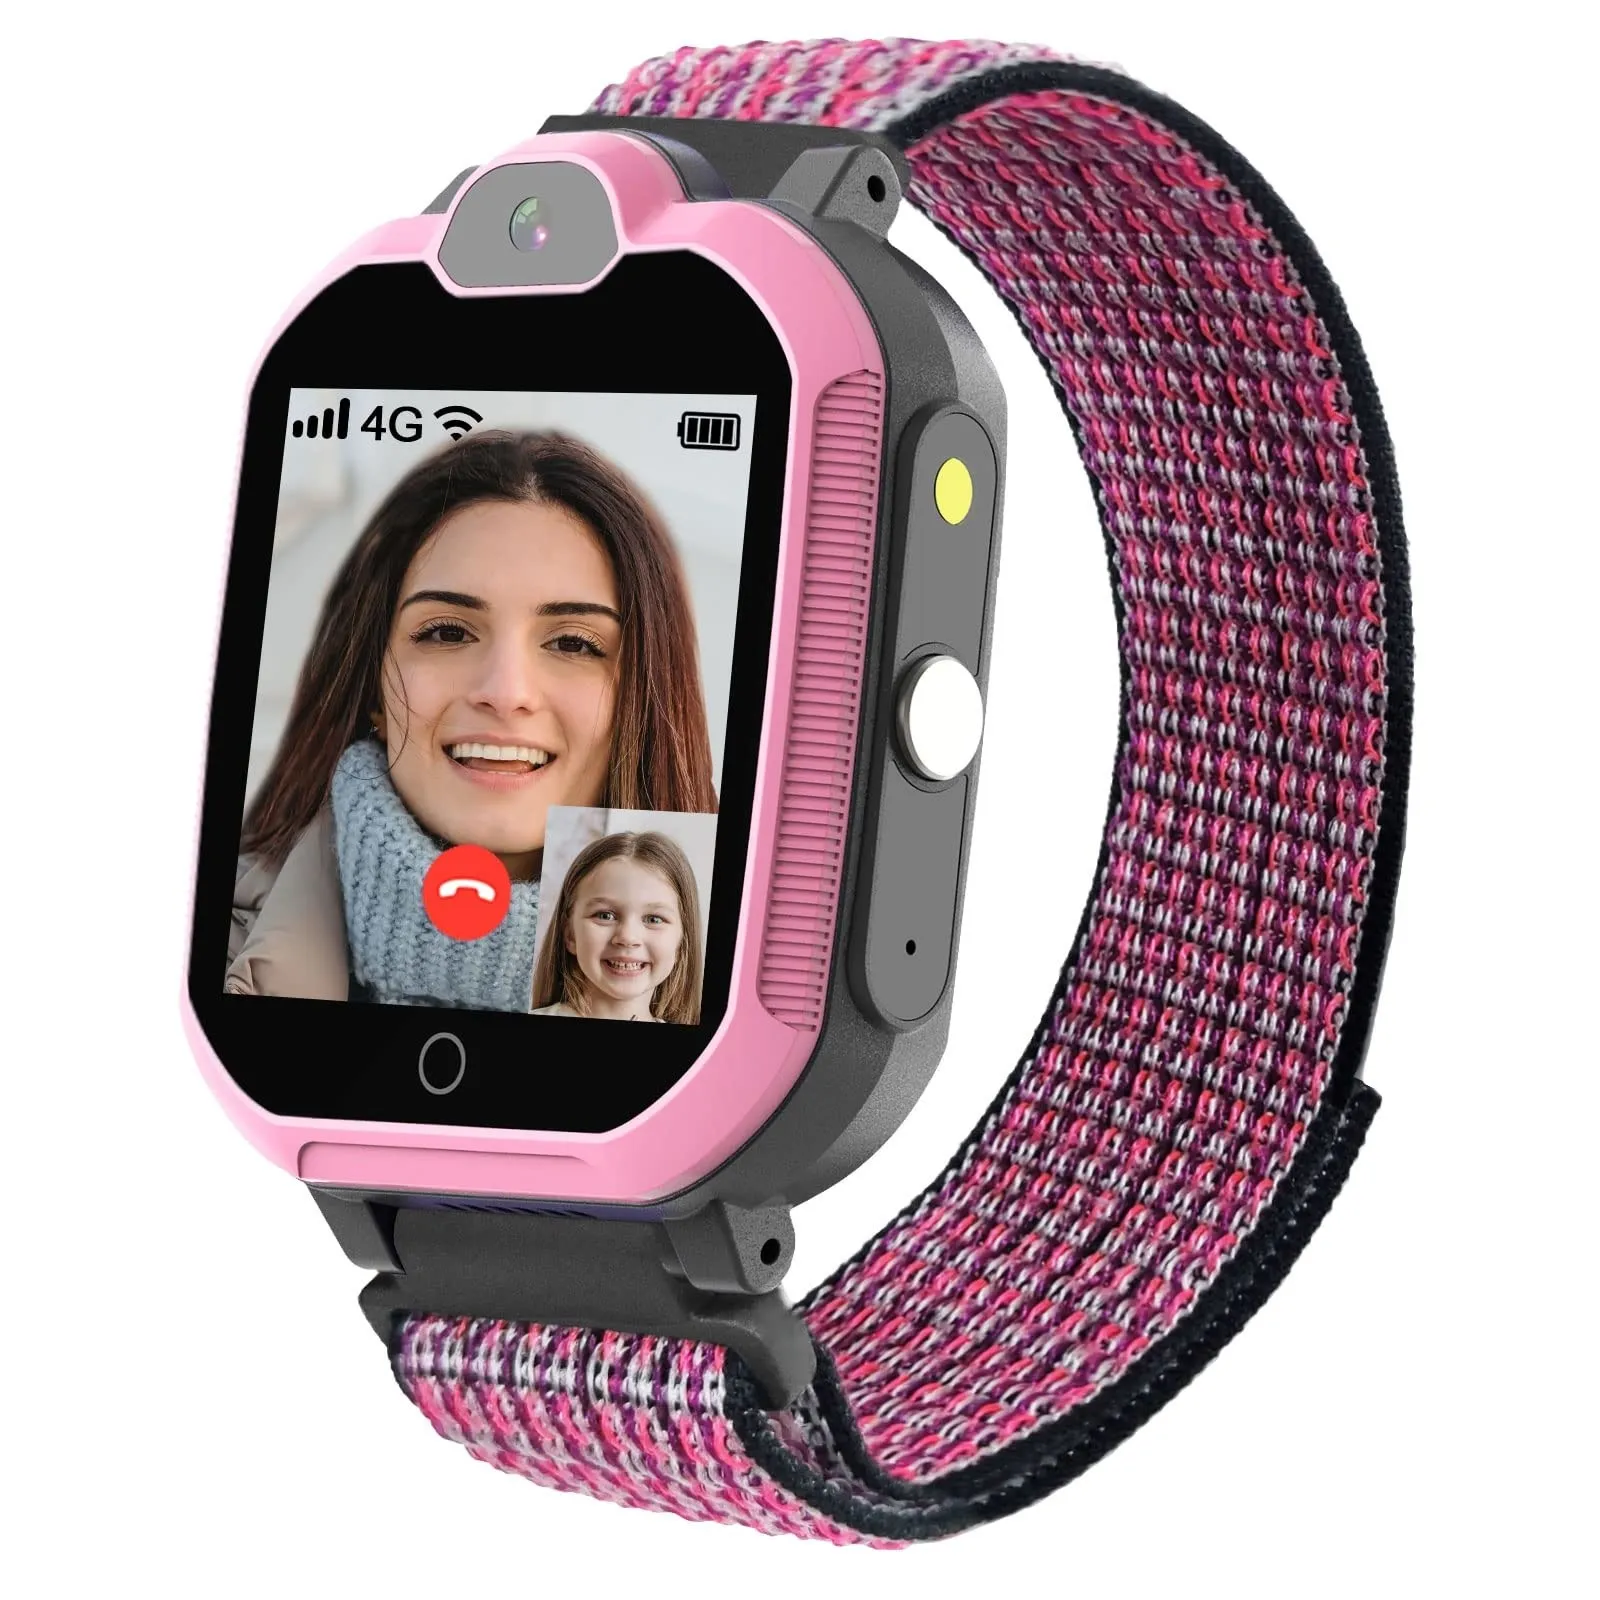 

4G Smart Watch For With SIM Card, GPS Tracker, Call, Voice & Video Chat, Alarm, Pedometer, Camera, SOS, Touch Screen Kids Sale